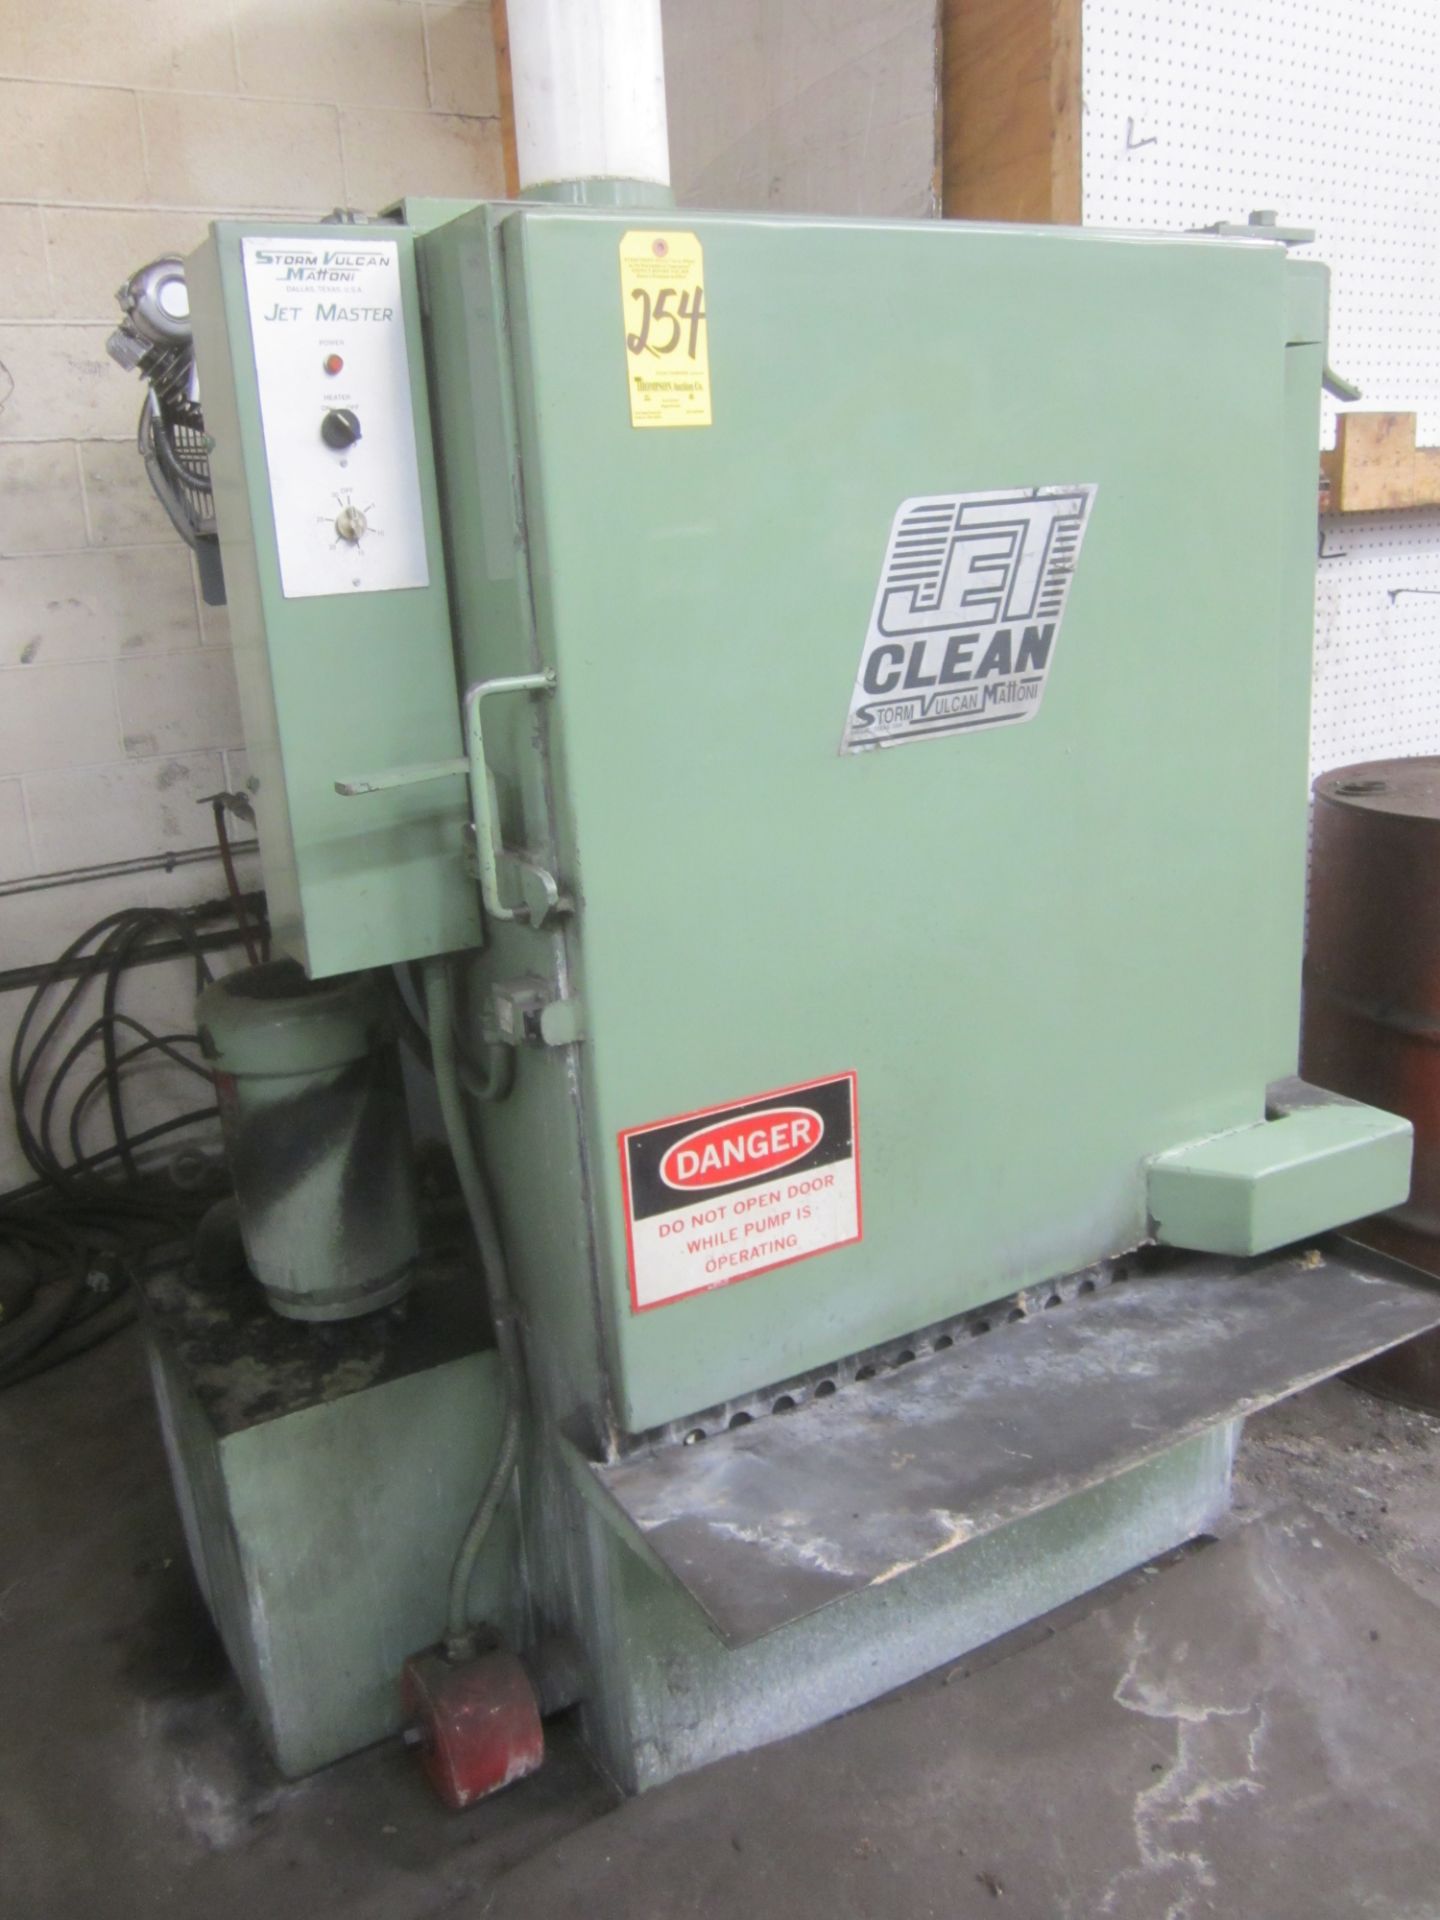 Storm Vulcan Mattoni Model SVM60 Electric Heated Jet Master Parts Washer, s/n 509, 5 HP Pump, 24"